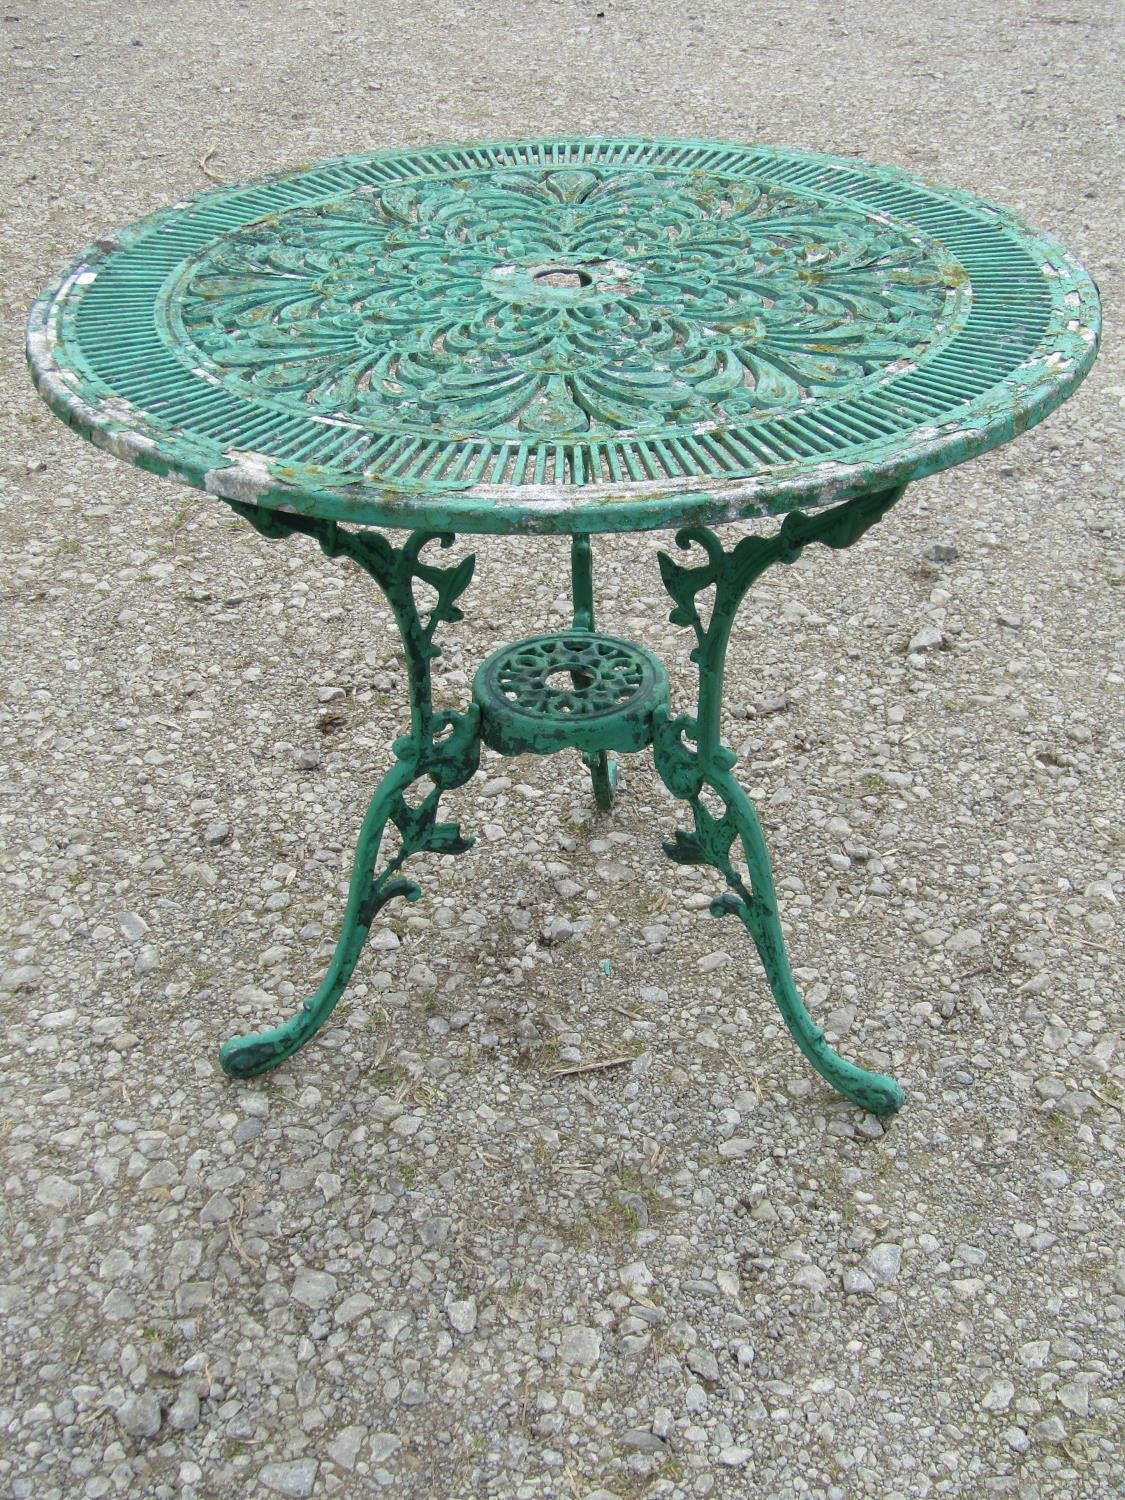 A weathered green painted cast aluminium garden terrace table of circular form with decorative - Image 3 of 4